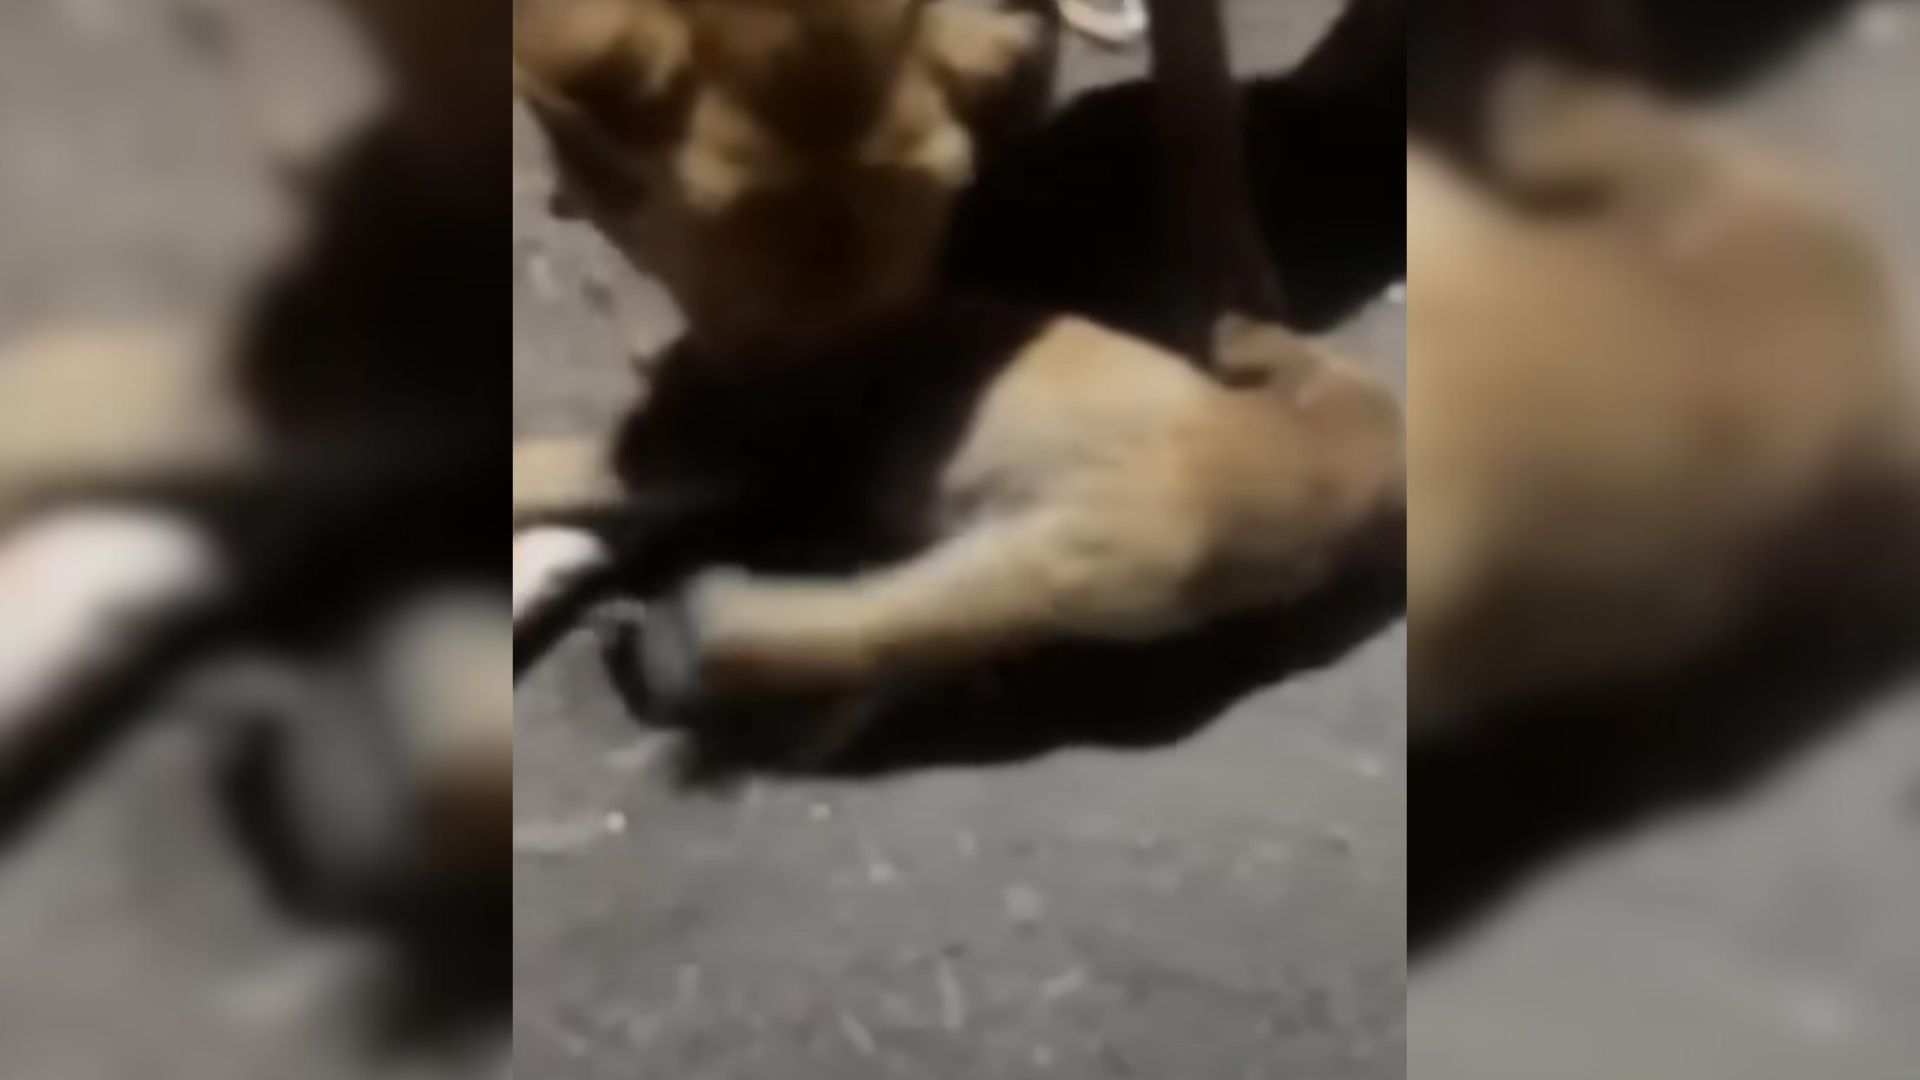 Mama Dog Dragged Her Injured Puppy Across The Street Crying Out For Help